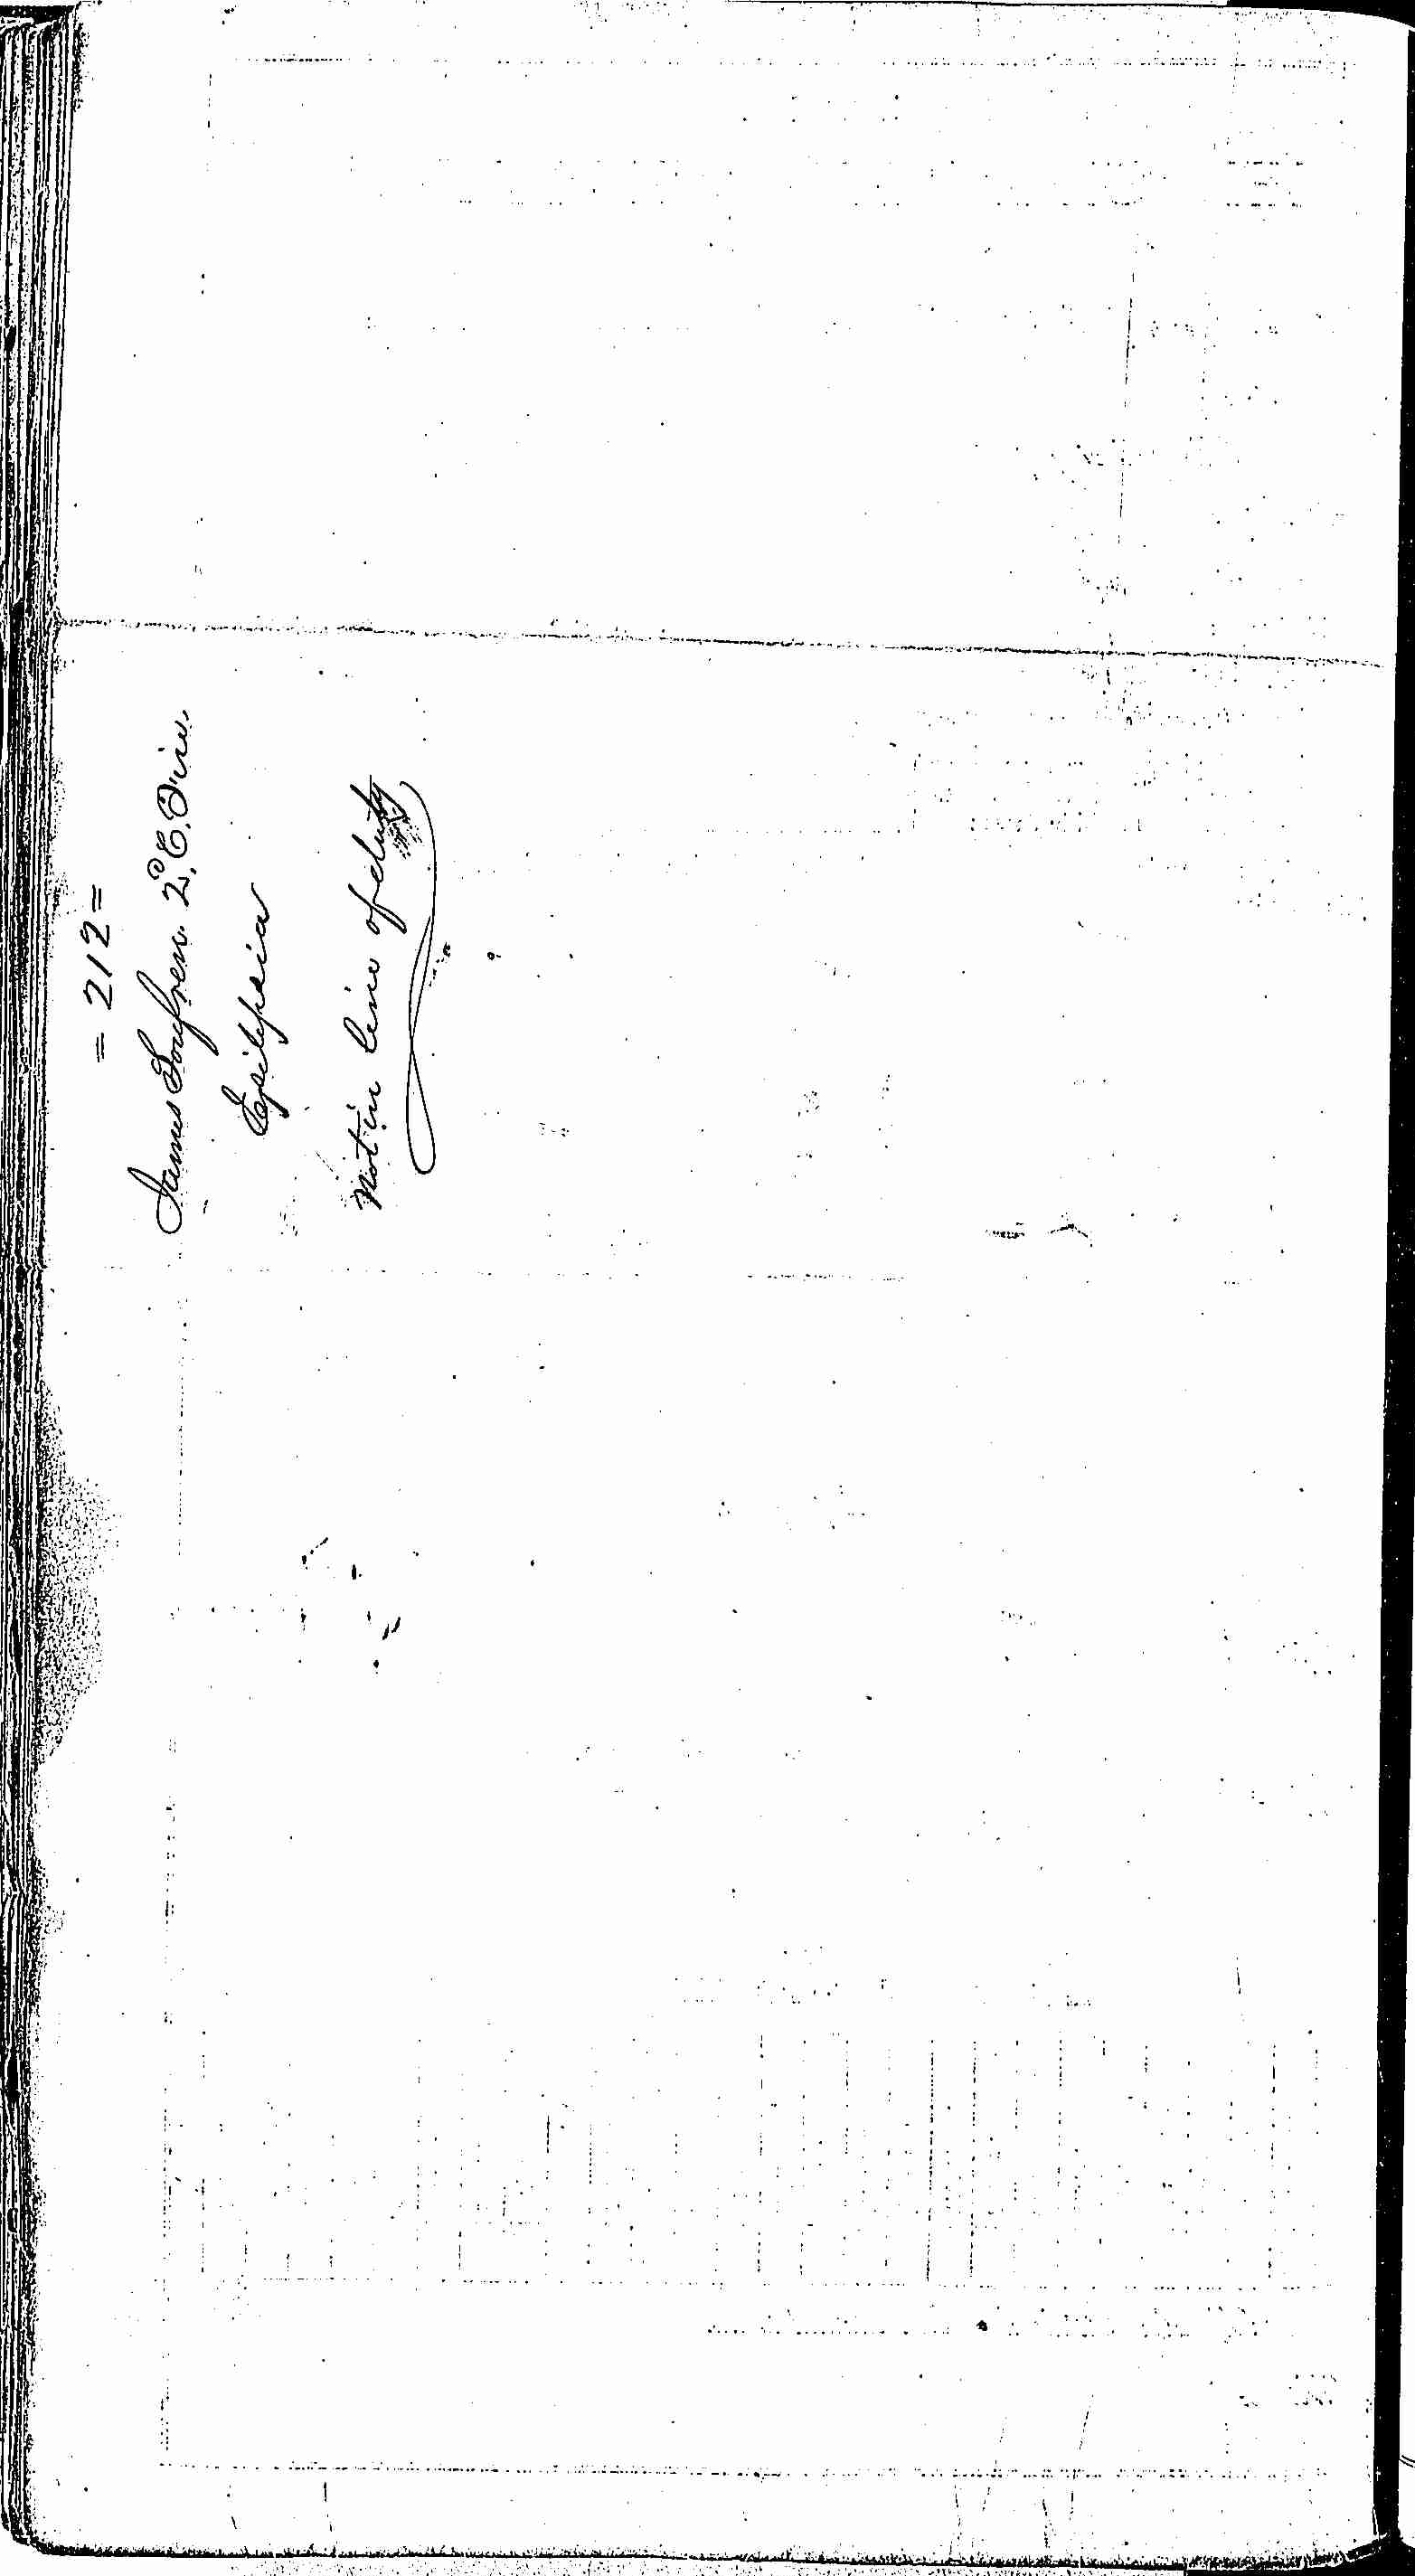 Entry for James Soufren (page 2 of 2) in the log Hospital Tickets and Case Papers - Naval Hospital - Washington, D.C. - 1866-68